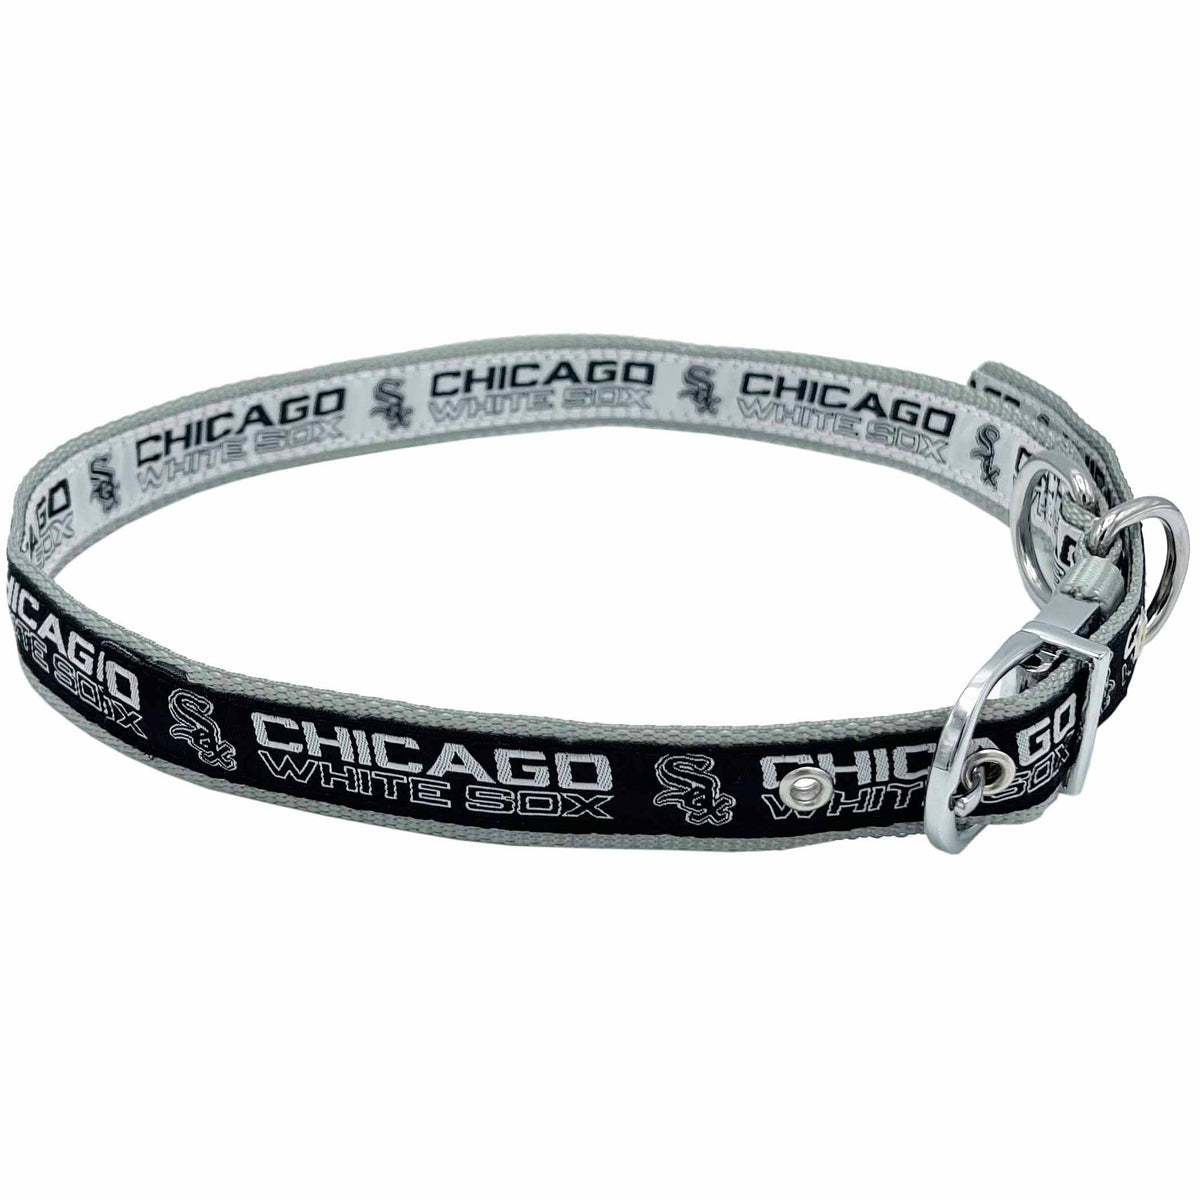 Chicago White Sox Dog Collar or Leash – 3 Red Rovers